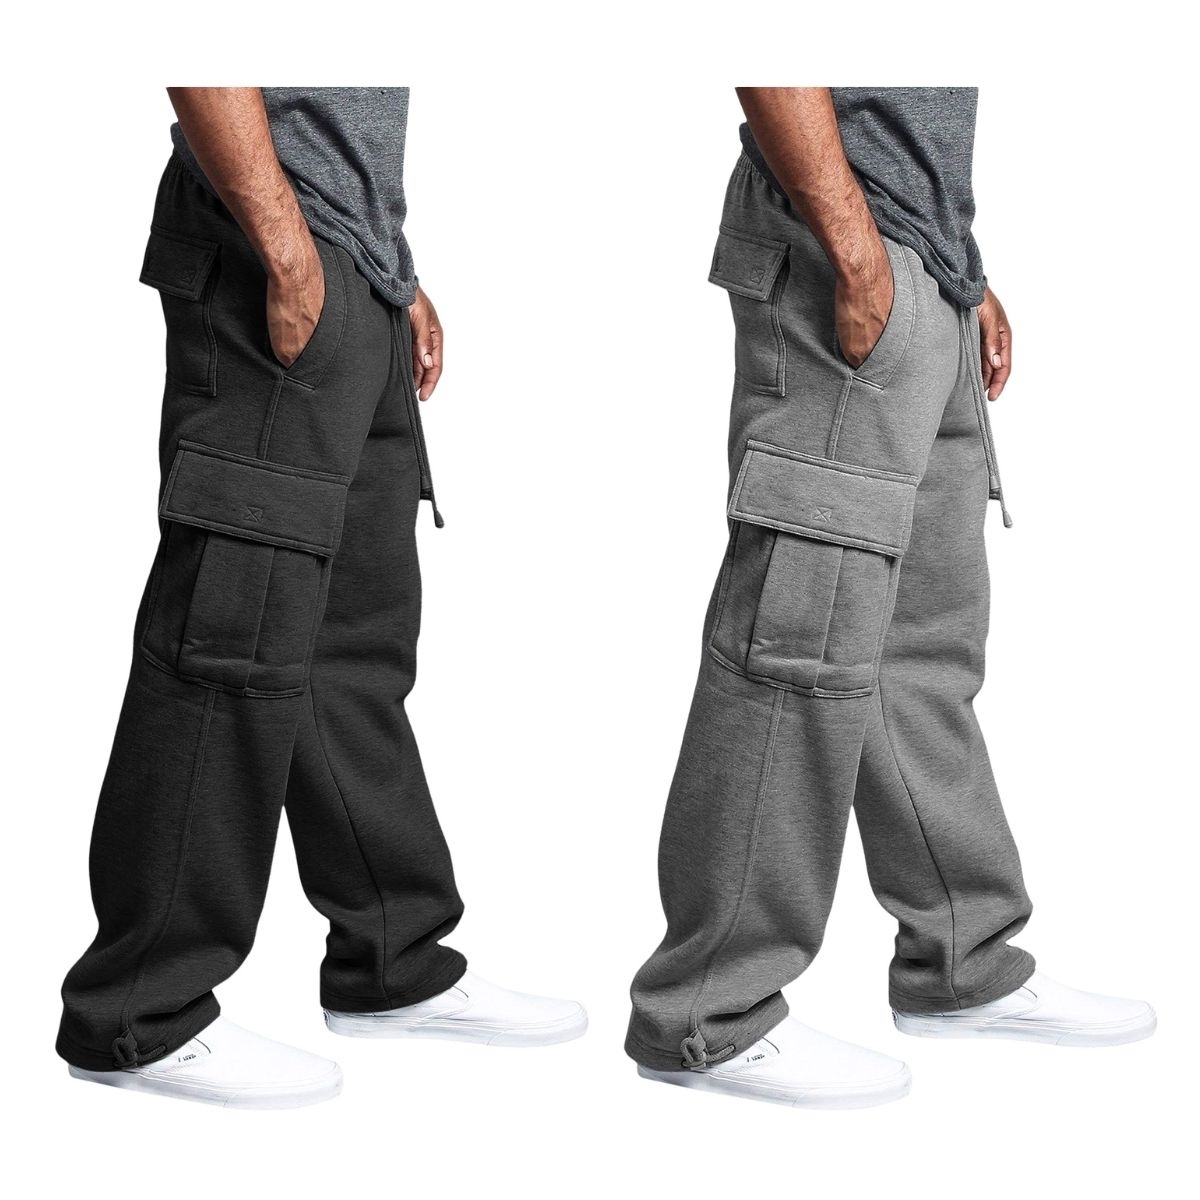 2-Pack: Men's Casual Solid Fleece Lined Cargo Jogger Soft Sweatpants With Pockets - Black&black, Xx-large